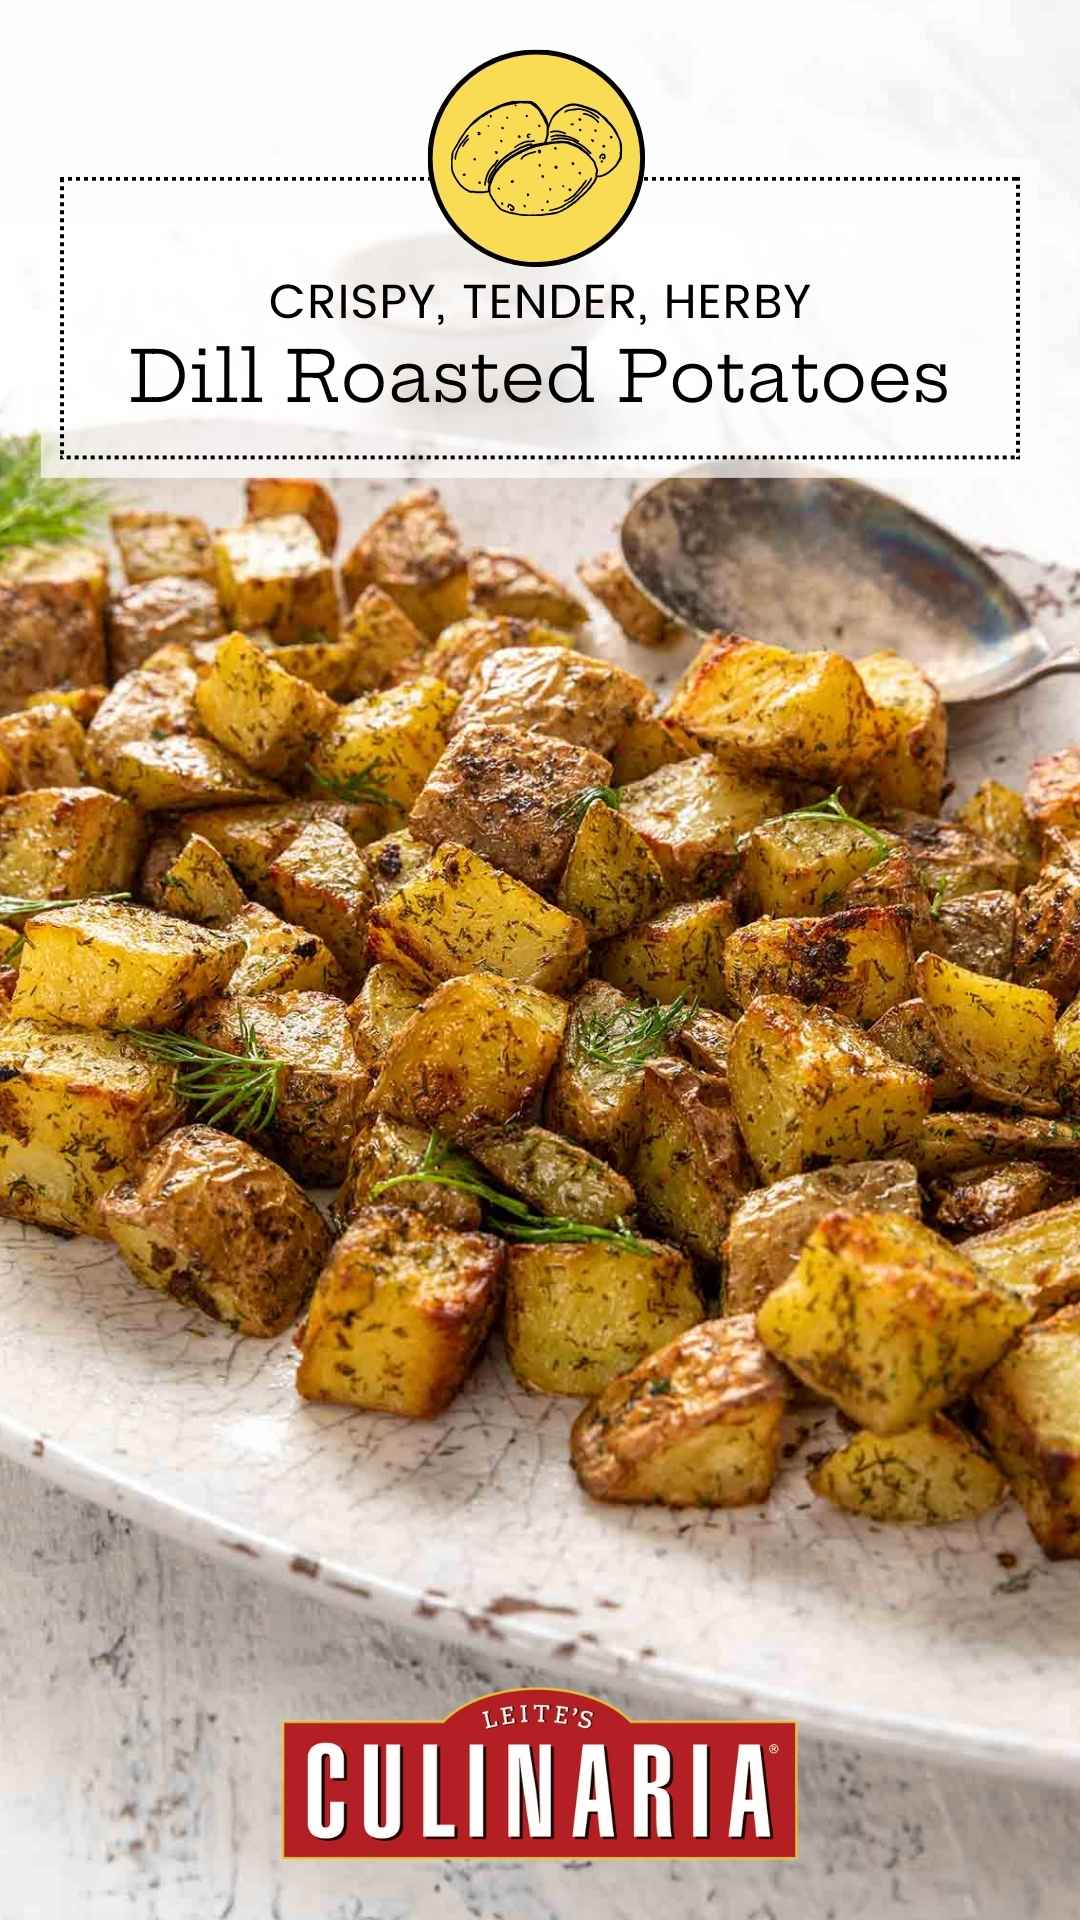 An oval platter filled with cubed roasted potatoes, garnished with fresh dill.